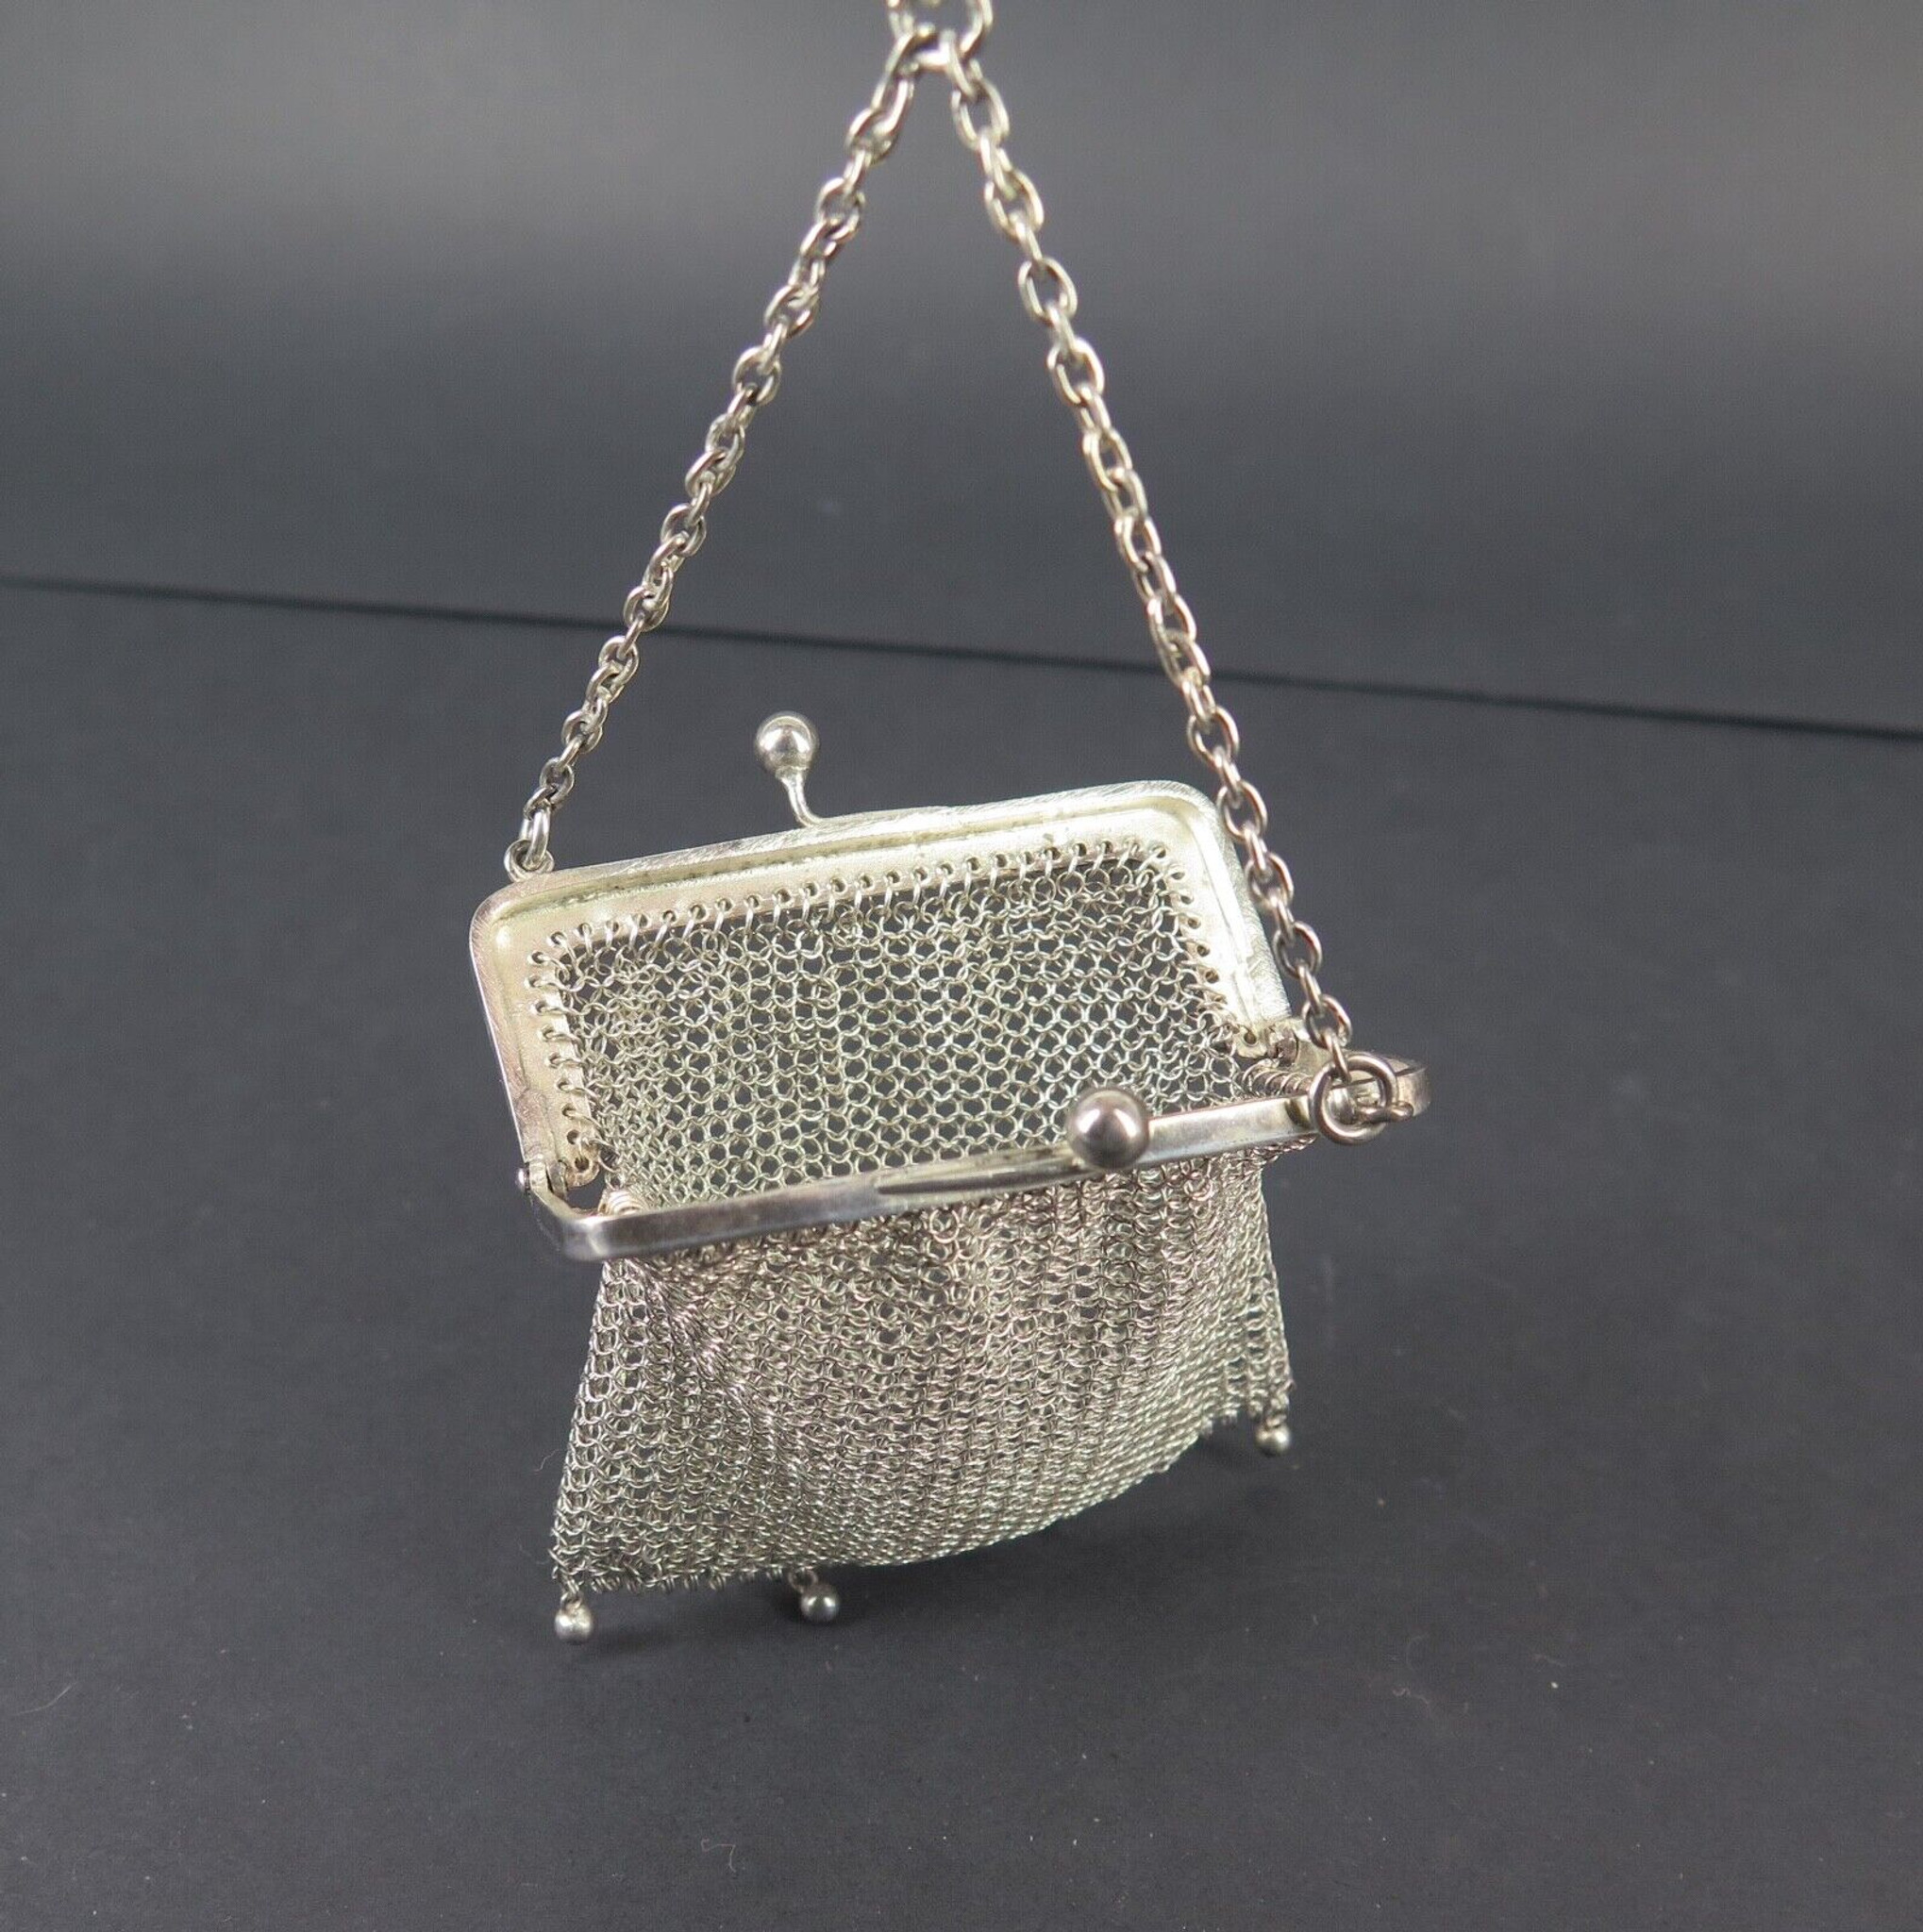 ANTIQUE SOLID SILVER Mesh Coin Purse Dove Shaped Clasp Garnet Eyes 40 grams  £56.00 - PicClick UK